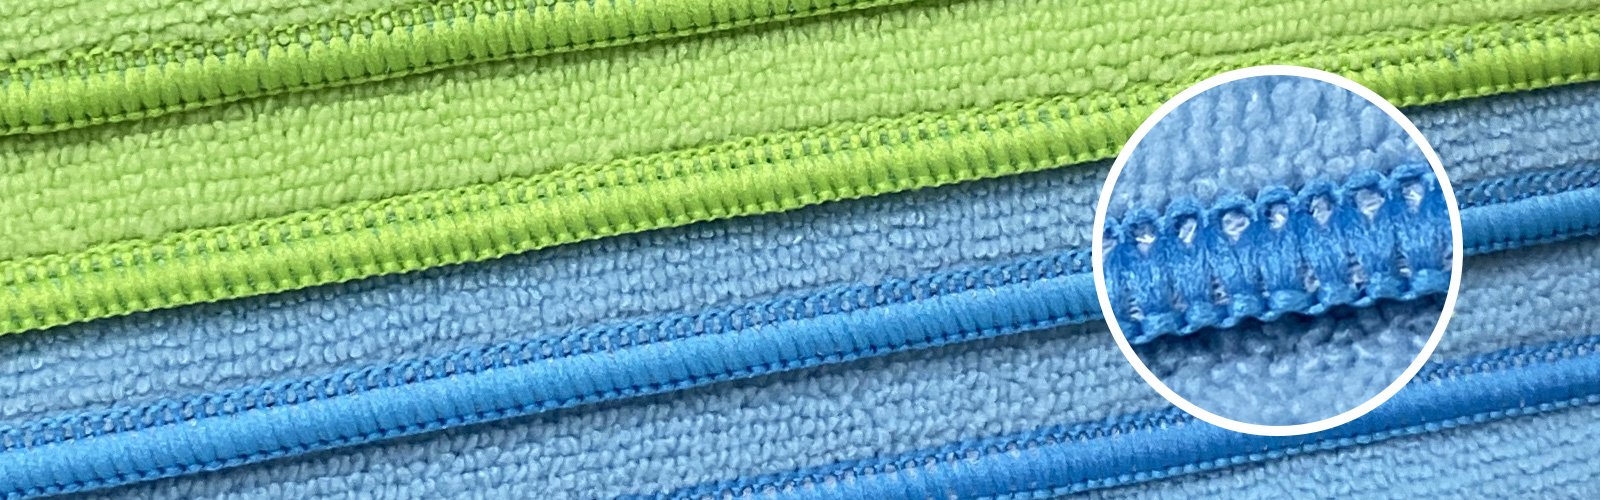 Made from AA recycled microfiber yarn, KINGMAX Great Towel is an eco-friendly durable towel, with great stitching details.